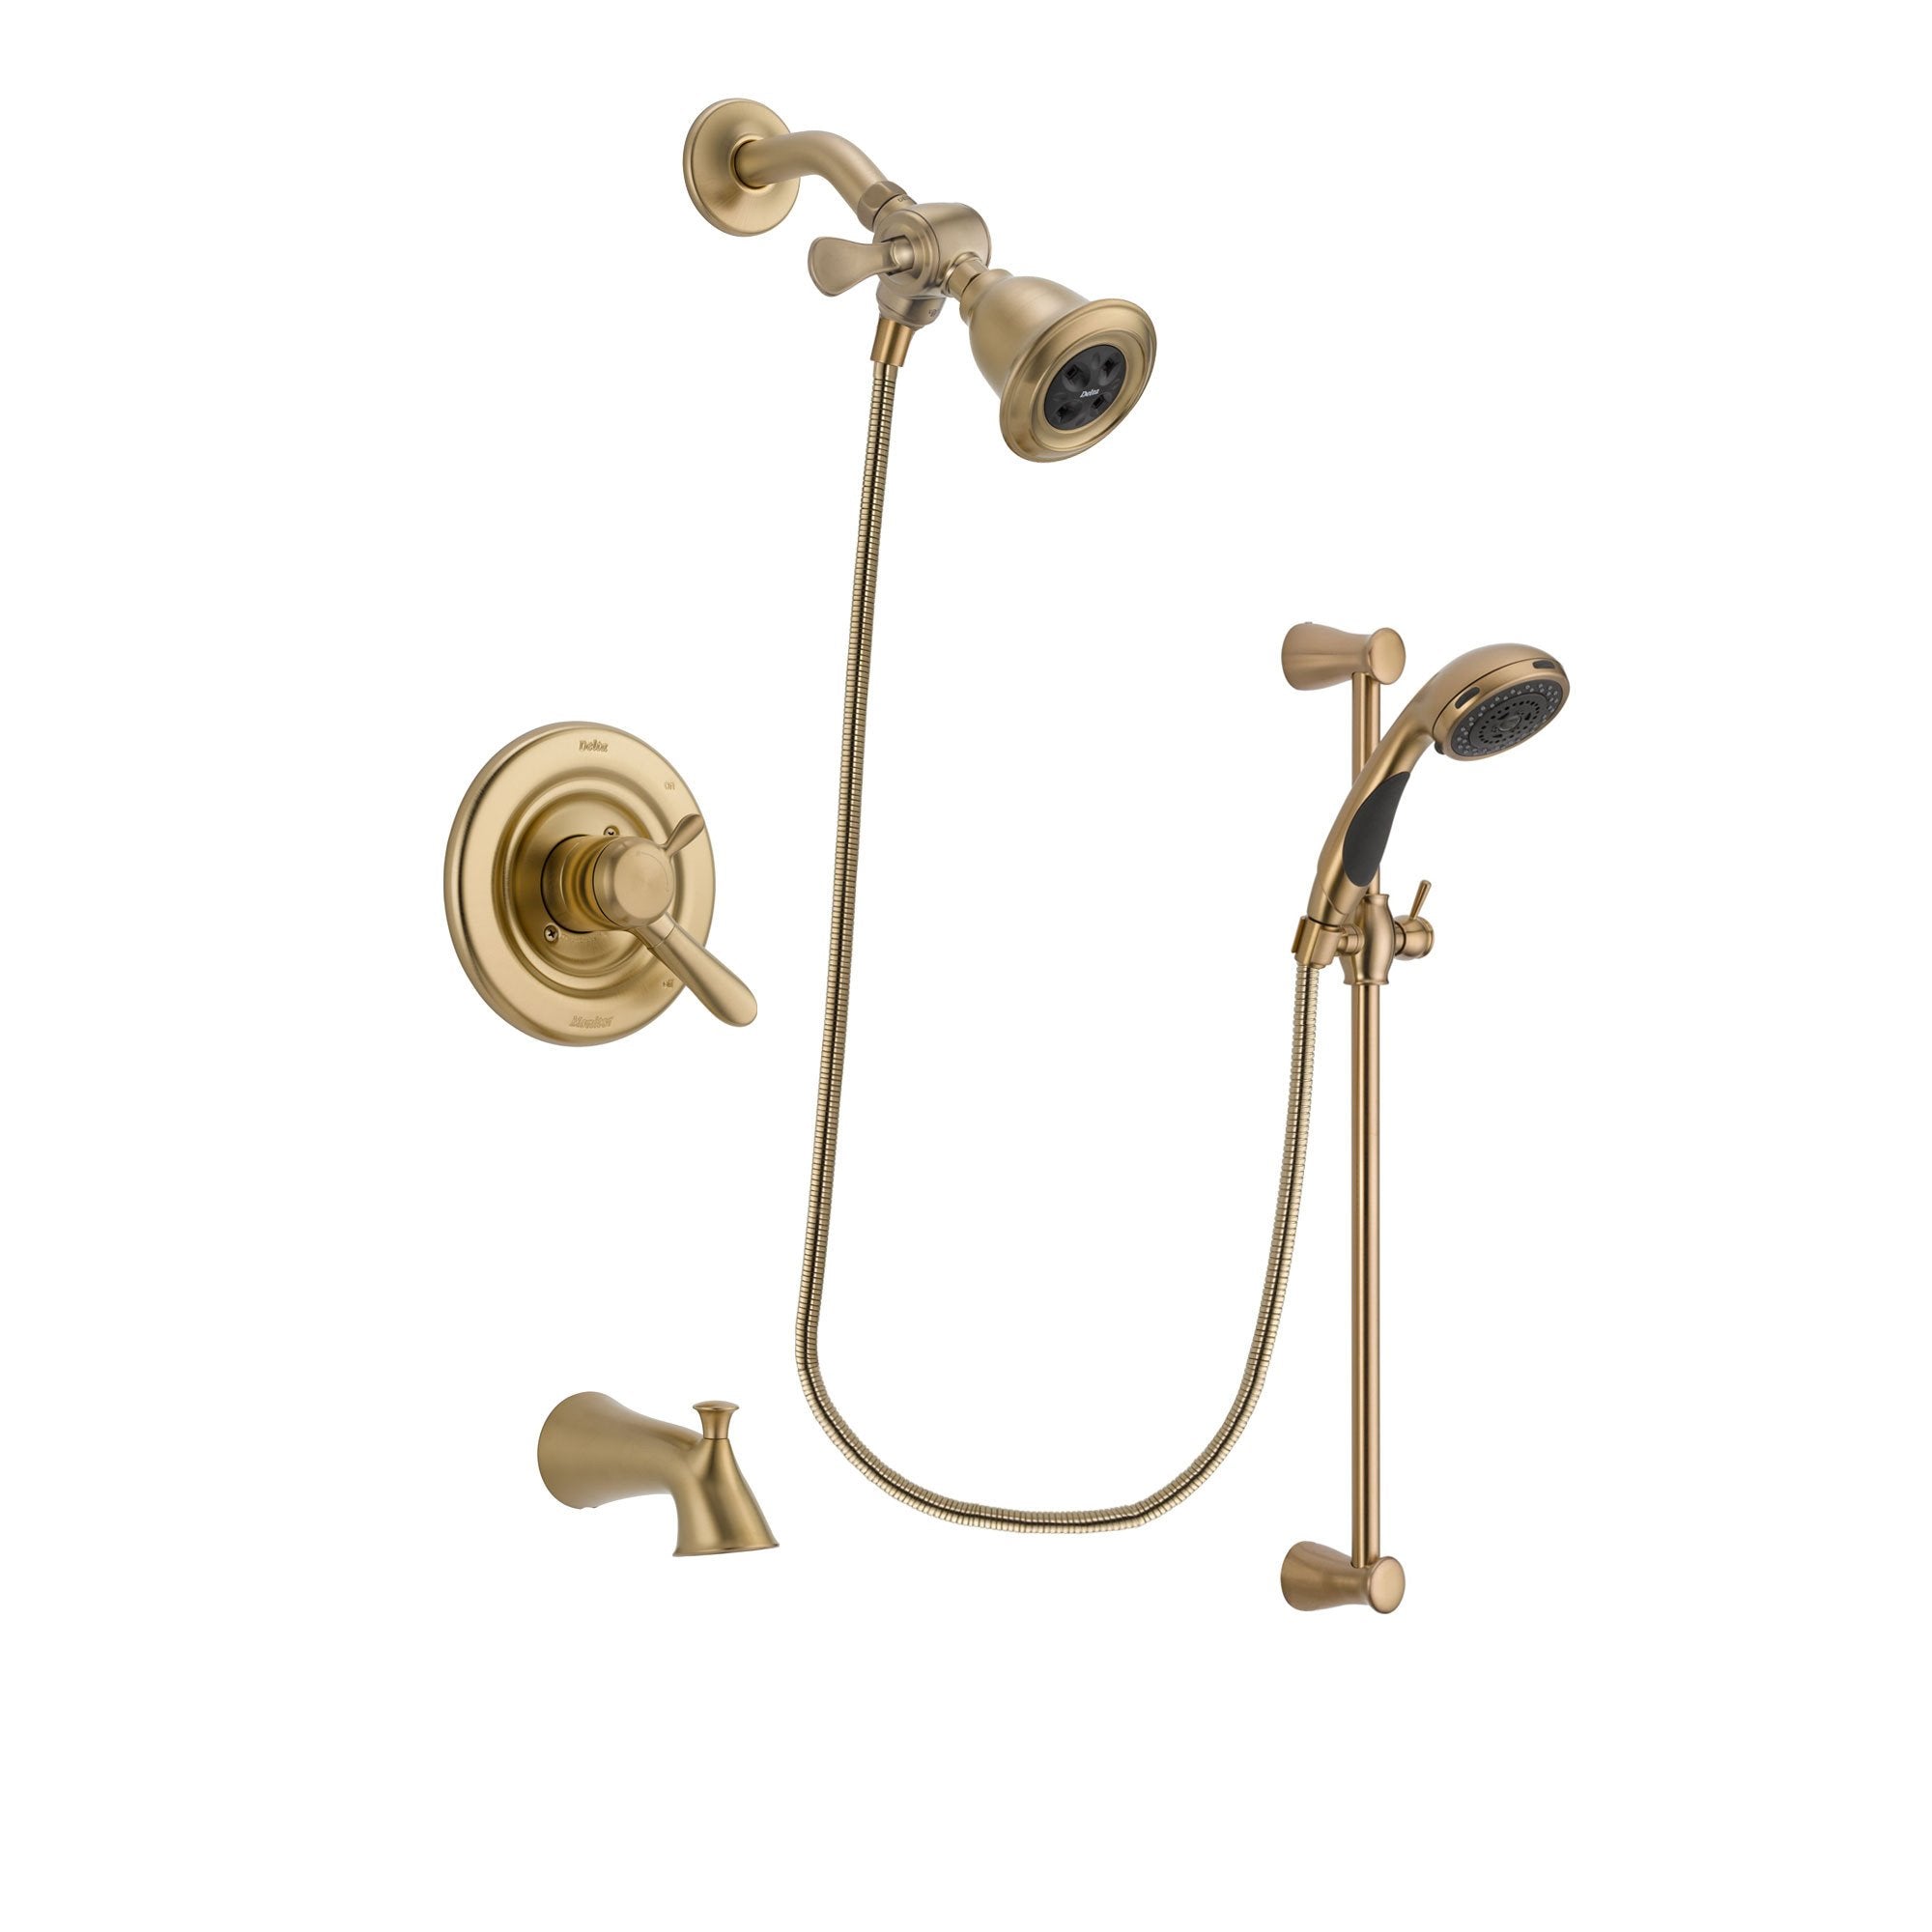 Delta Lahara Champagne Bronze Finish Dual Control Tub and Shower Faucet System Package with Water Efficient Showerhead and Personal Handheld Shower Sprayer with Slide Bar Includes Rough-in Valve and Tub Spout DSP3463V